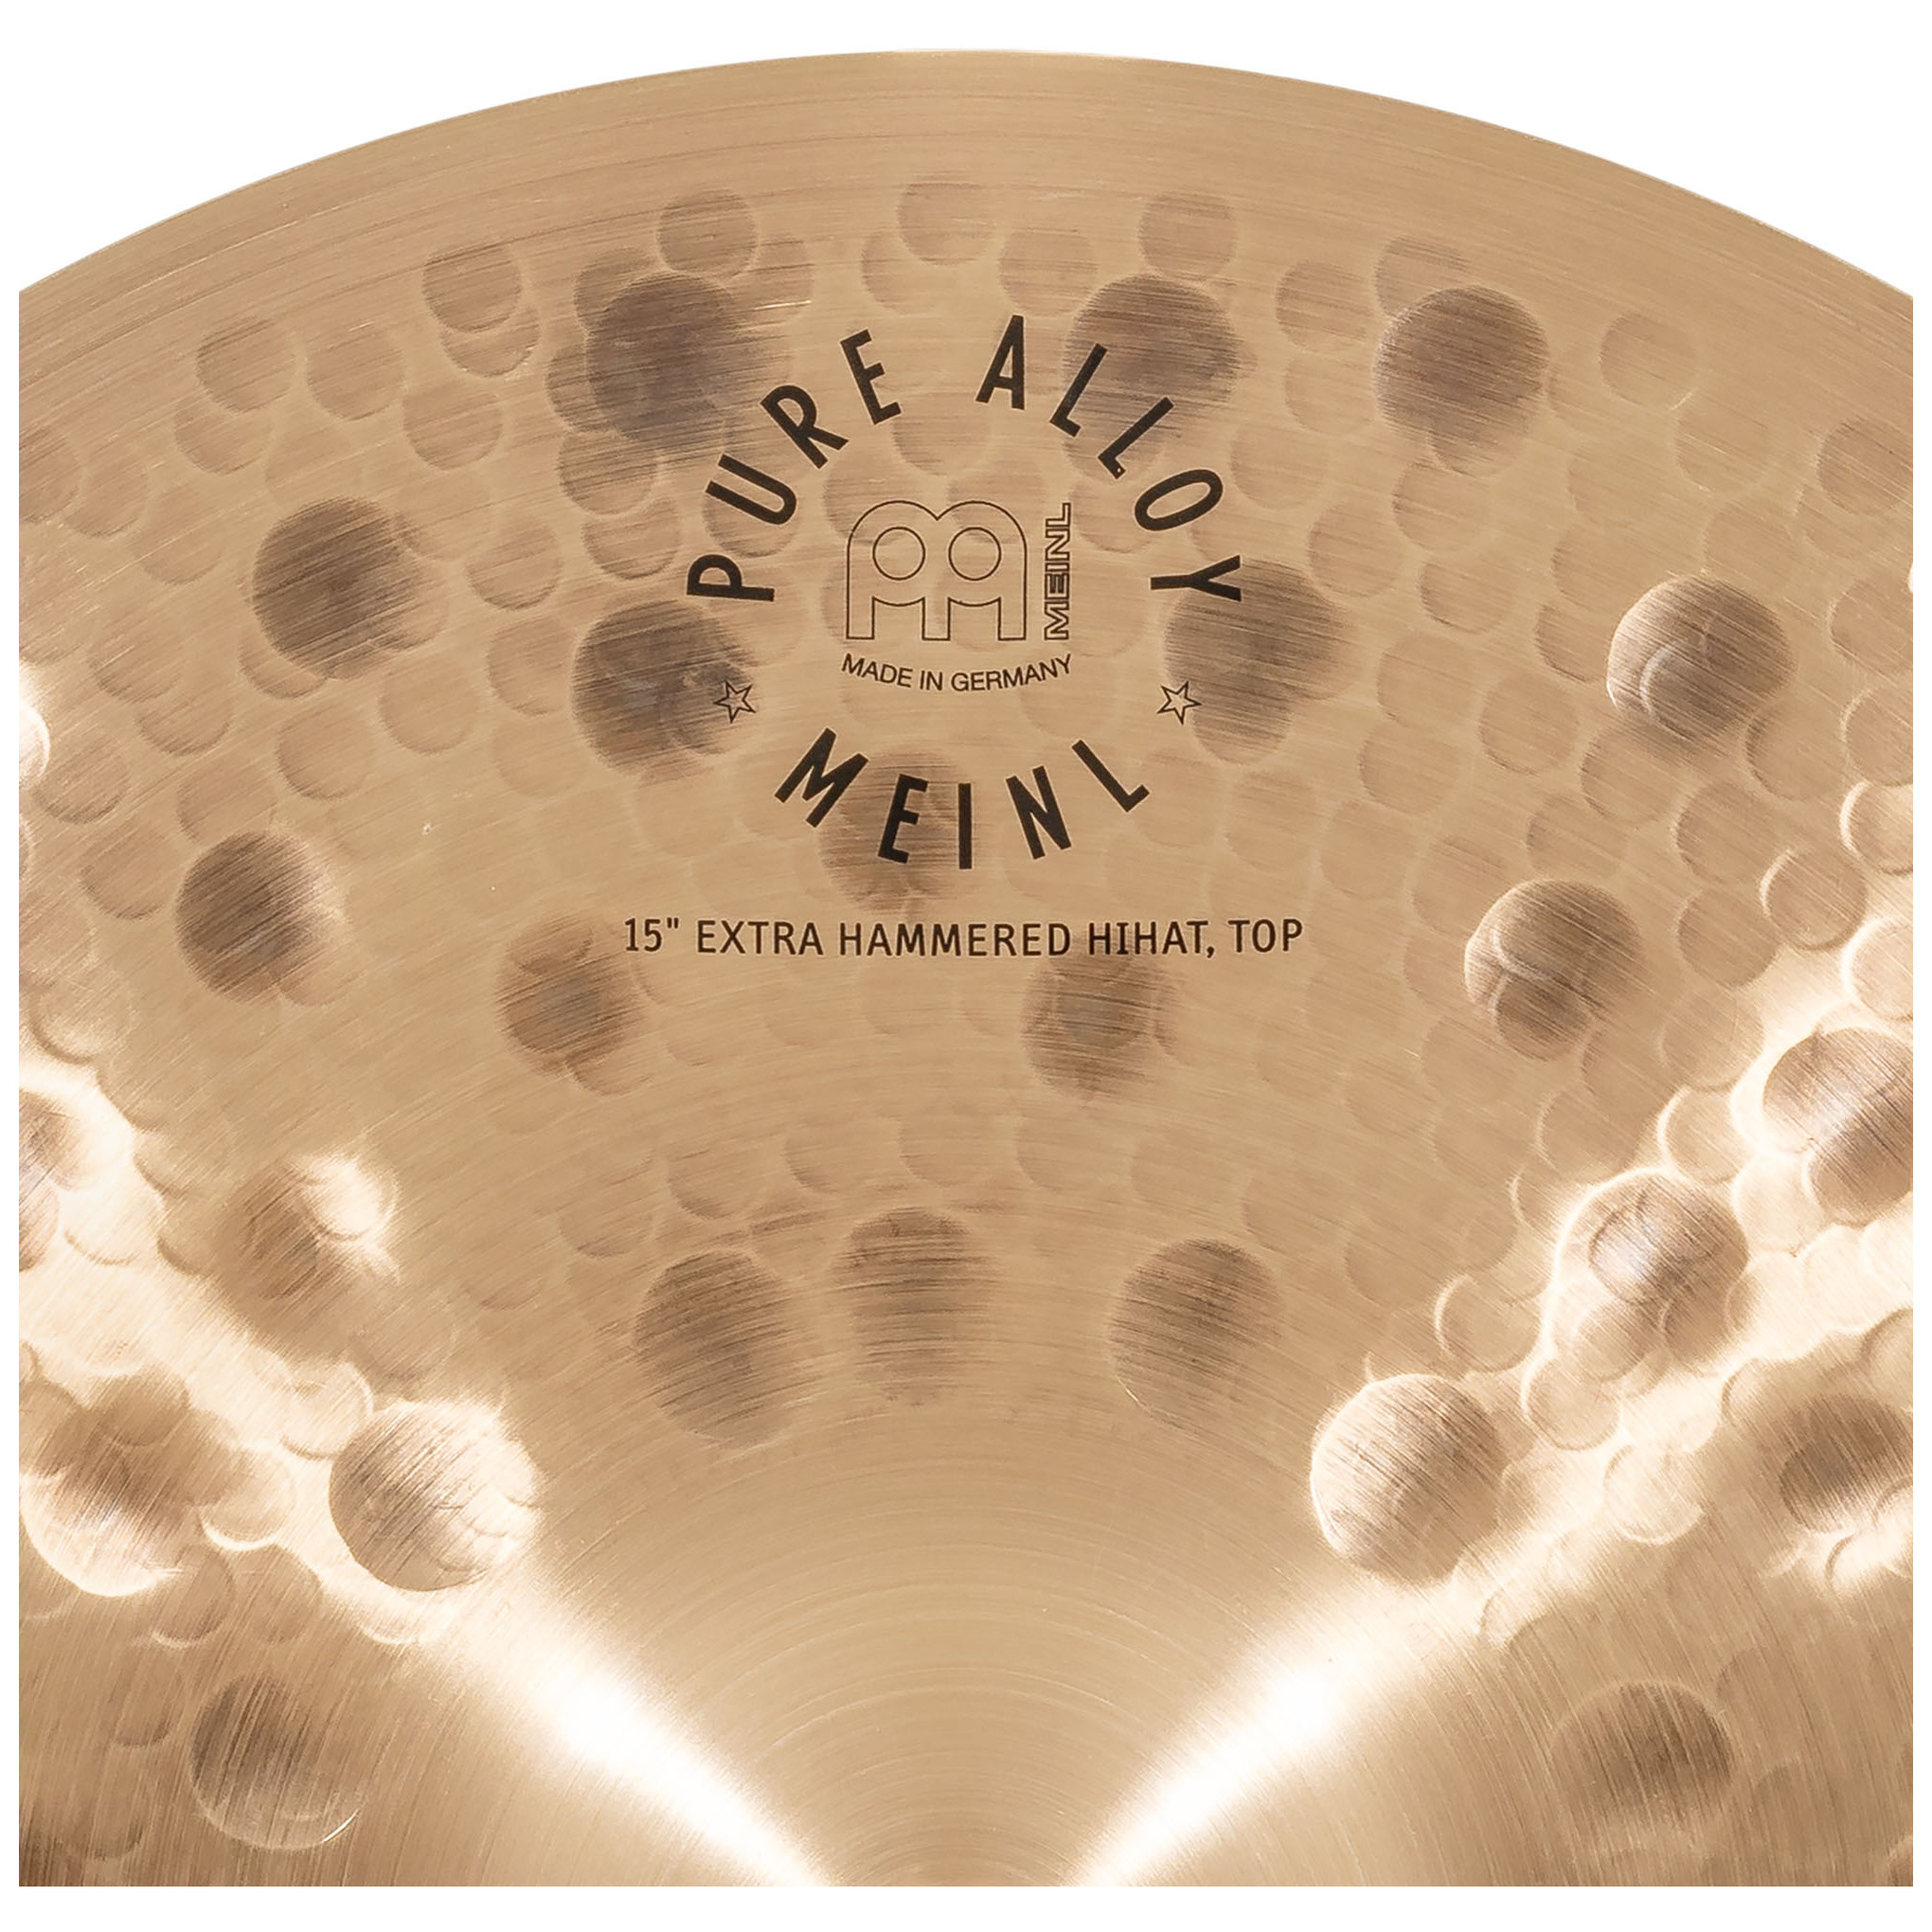 Meinl Cymbals PA15EHH - 15" Pure Alloy Extra Hammered Hihat 9